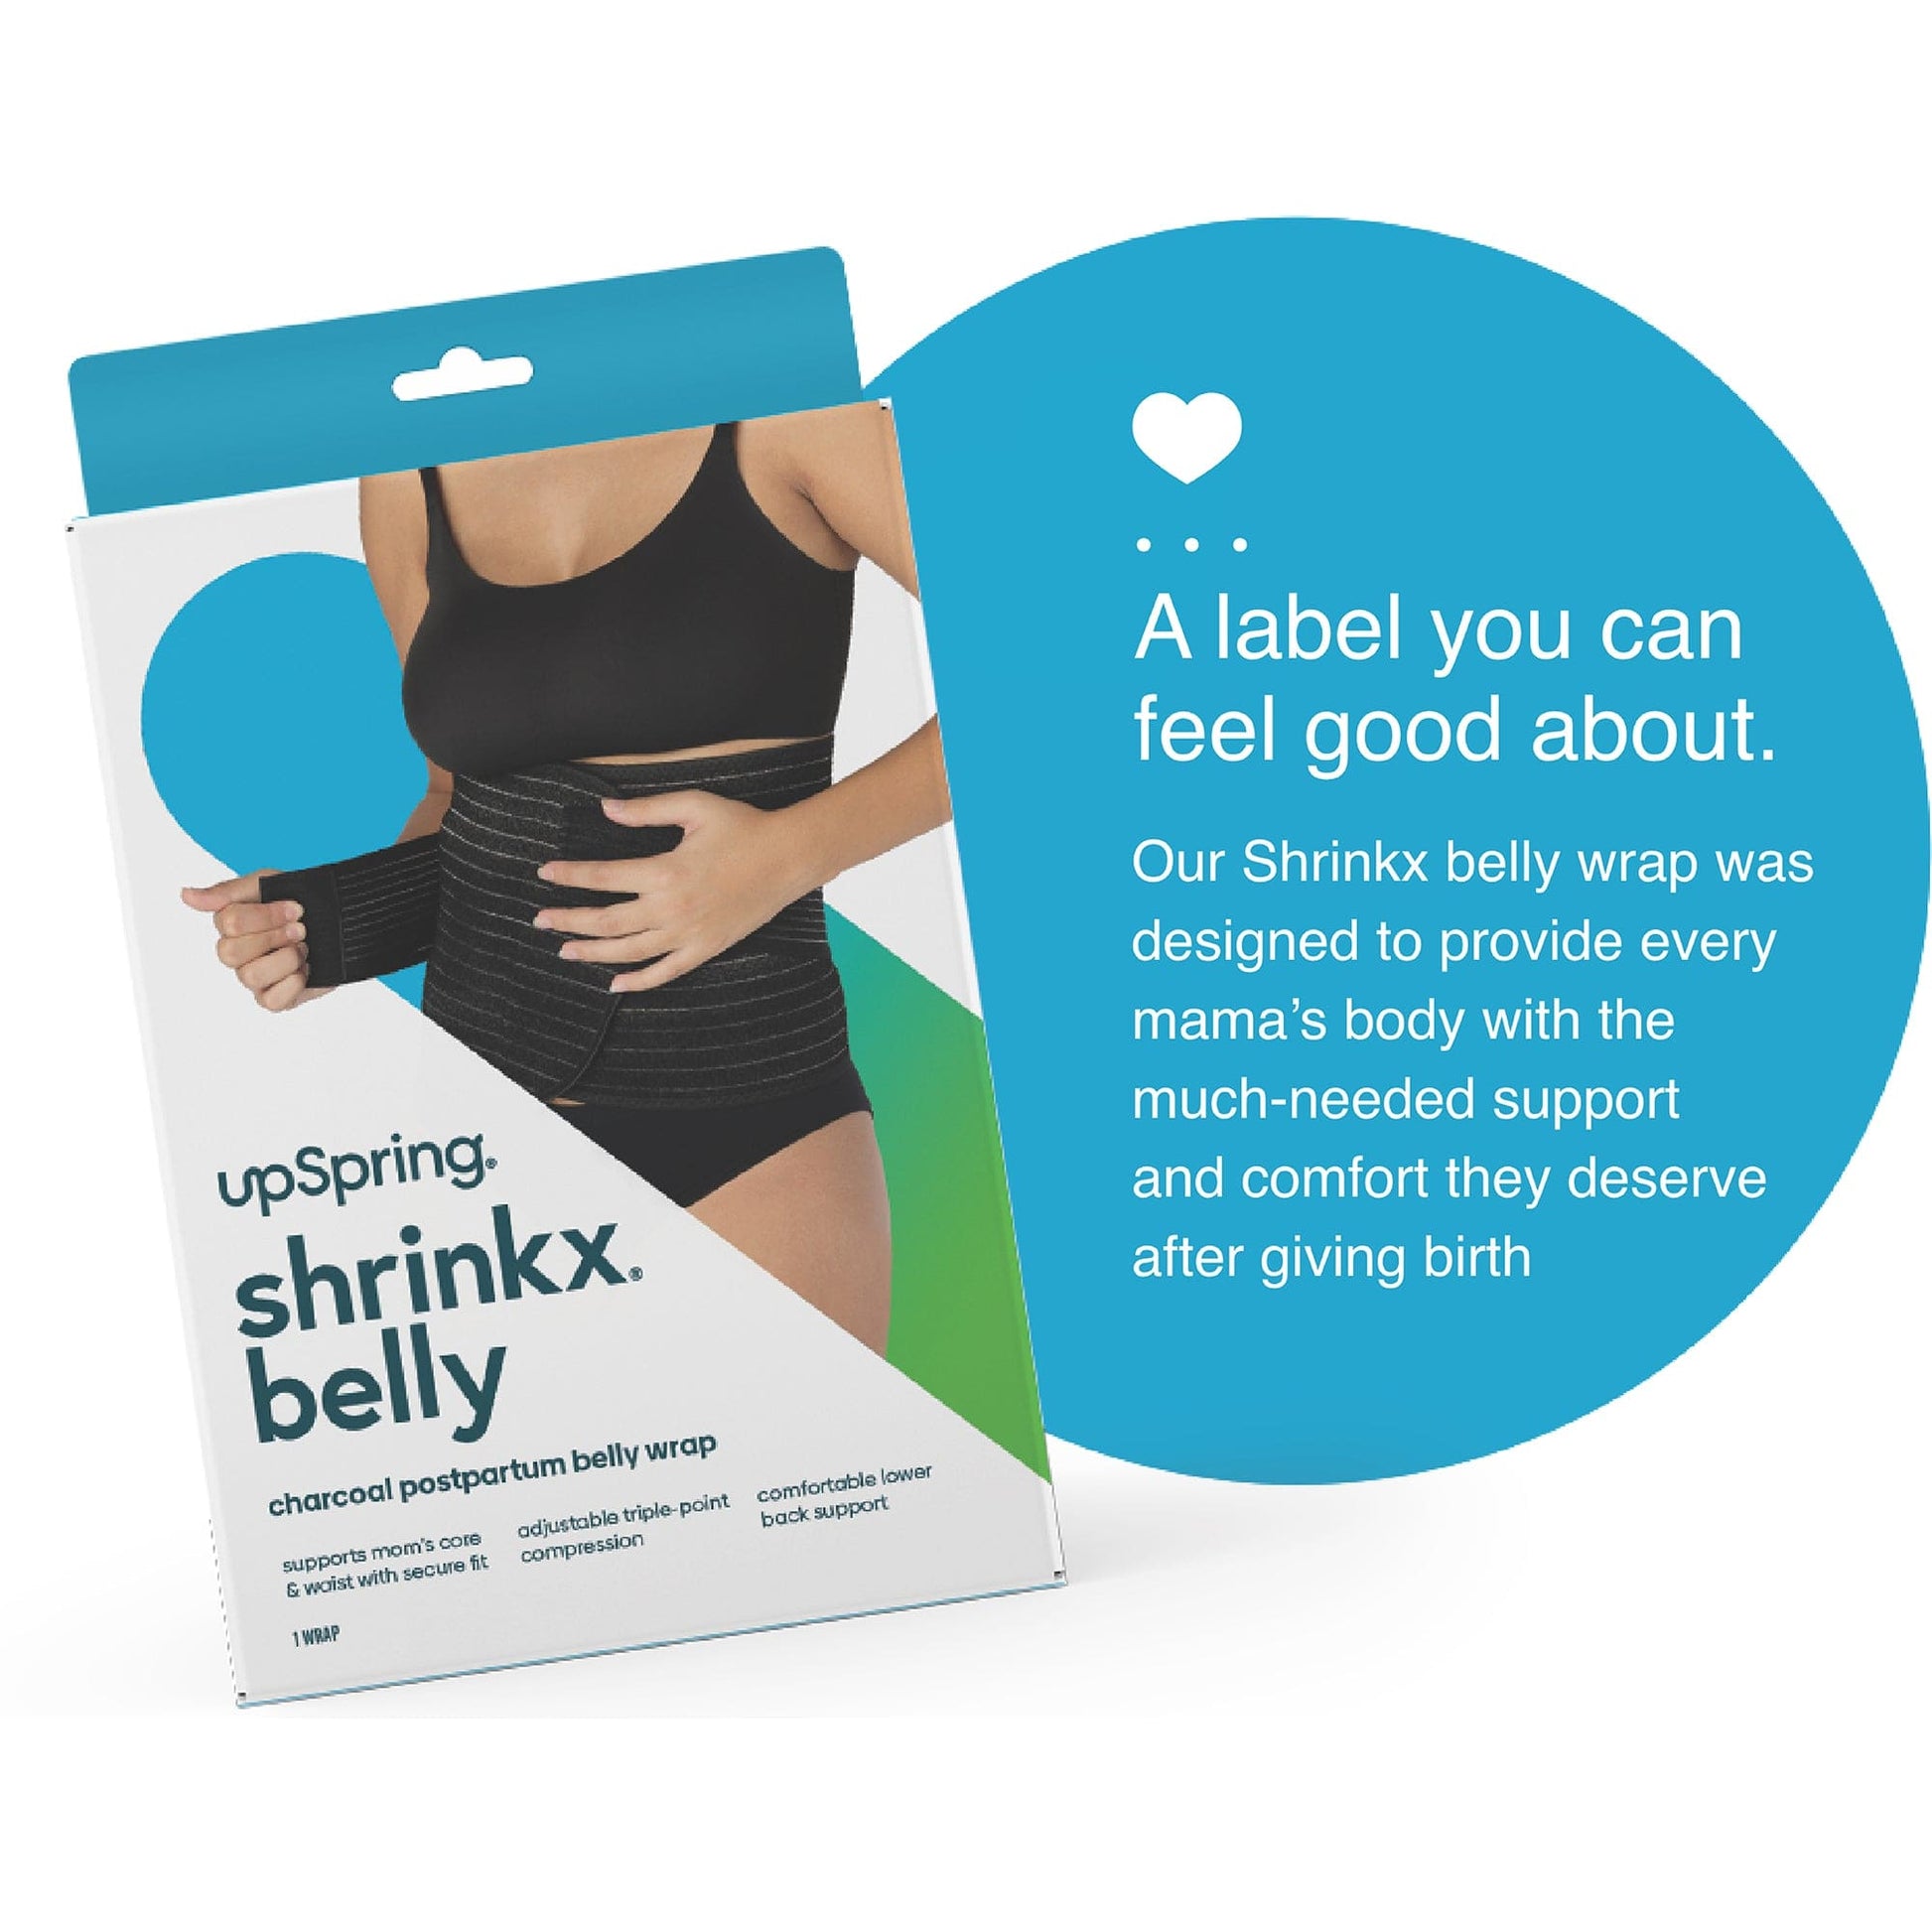 Here's what belly binding can do for your postpartum body